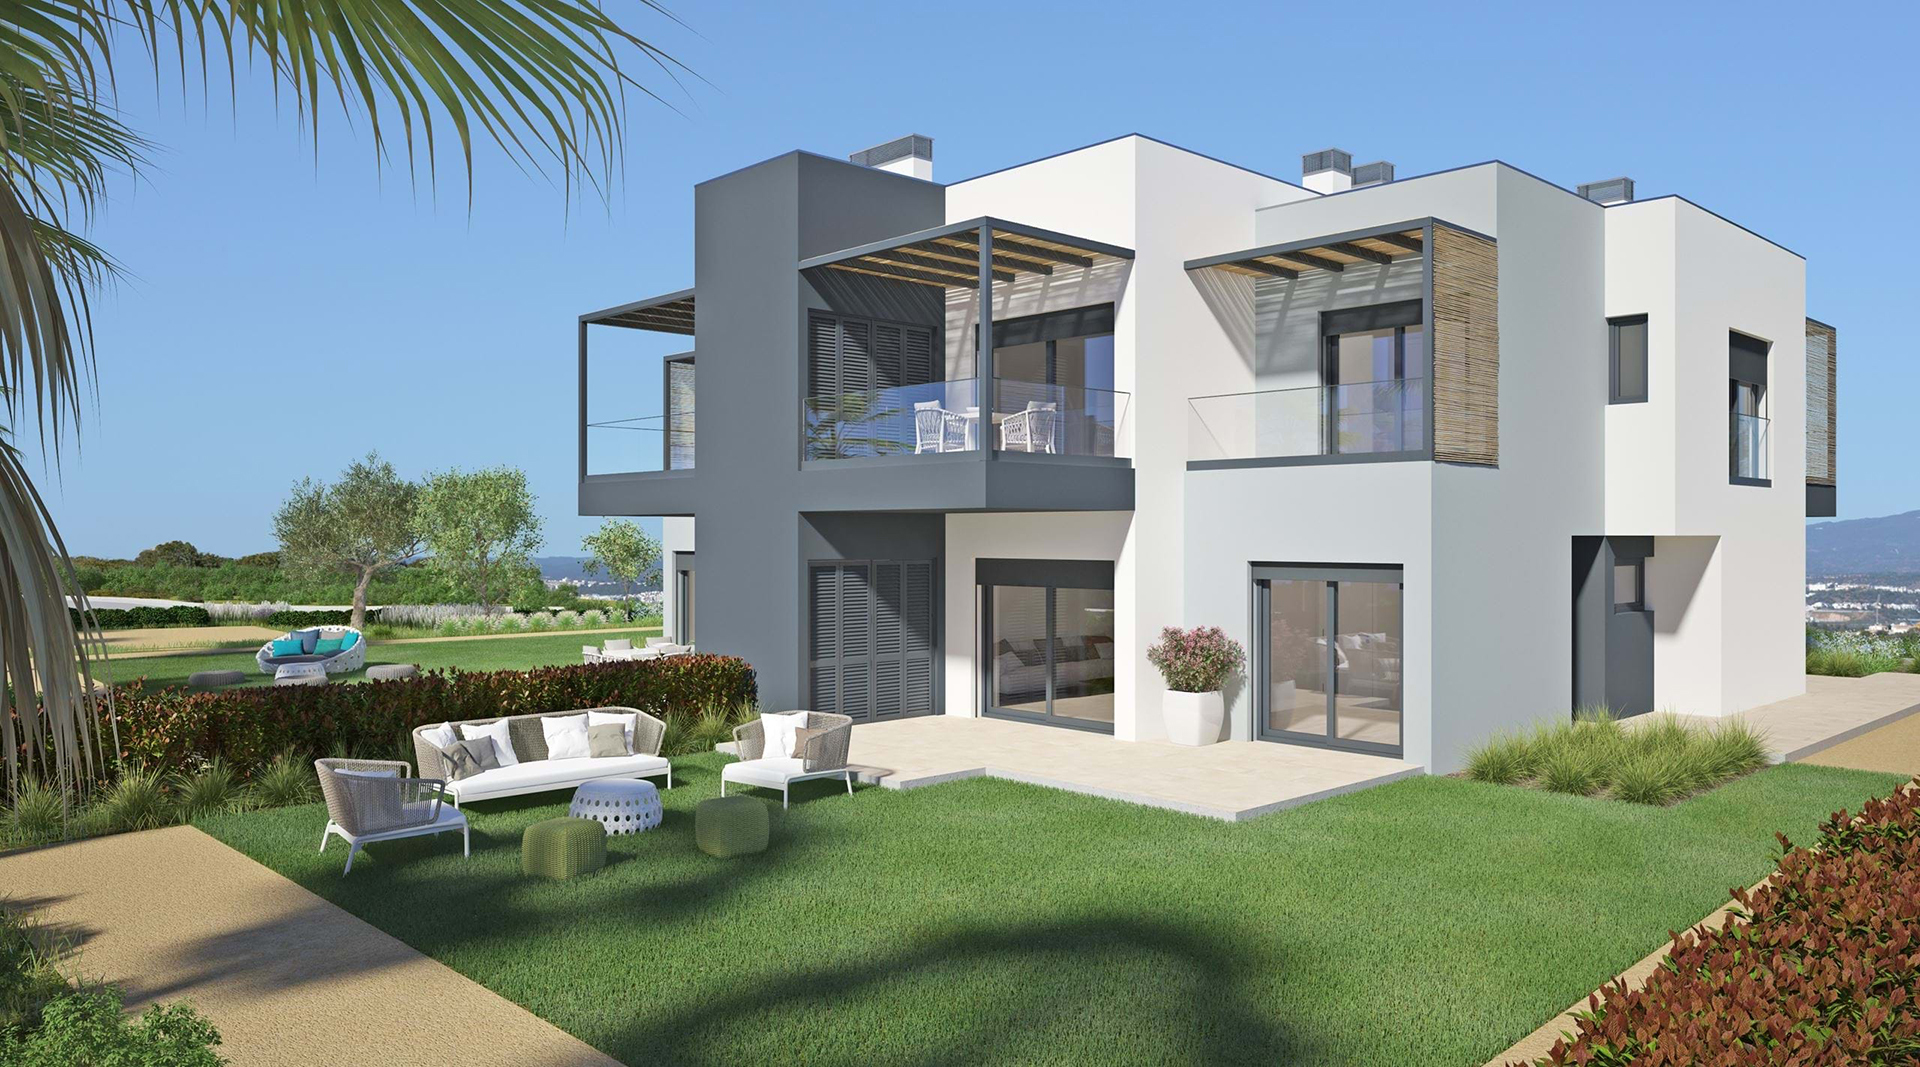 Under Construction 1+2 bedroom apartments with communal pool near the beach and Carvoeiro | PCG2044 Modern ground floor apartments with 1+2 bedrooms, one with en-suite bathroom and a family bathroom near the beautiful coastal town of Carvoeiro in the Algarve. Perfect as an investment or holiday property and suitable for holiday rental.